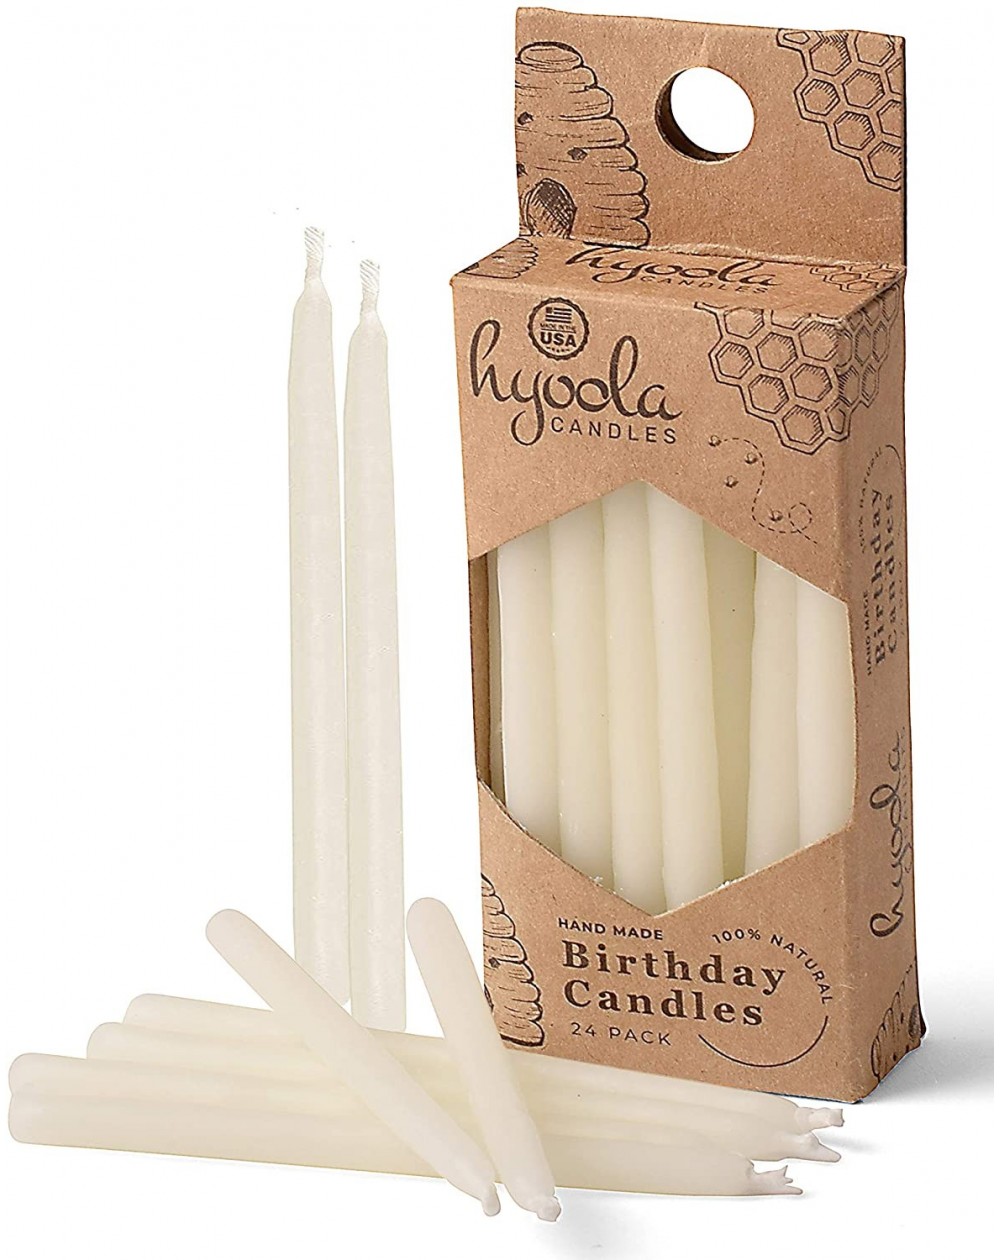 Cake Decorating Supplies Beeswax Birthday Candles 24 Pack White - Paraffin-Free - C8193KAY8O9 $12.65